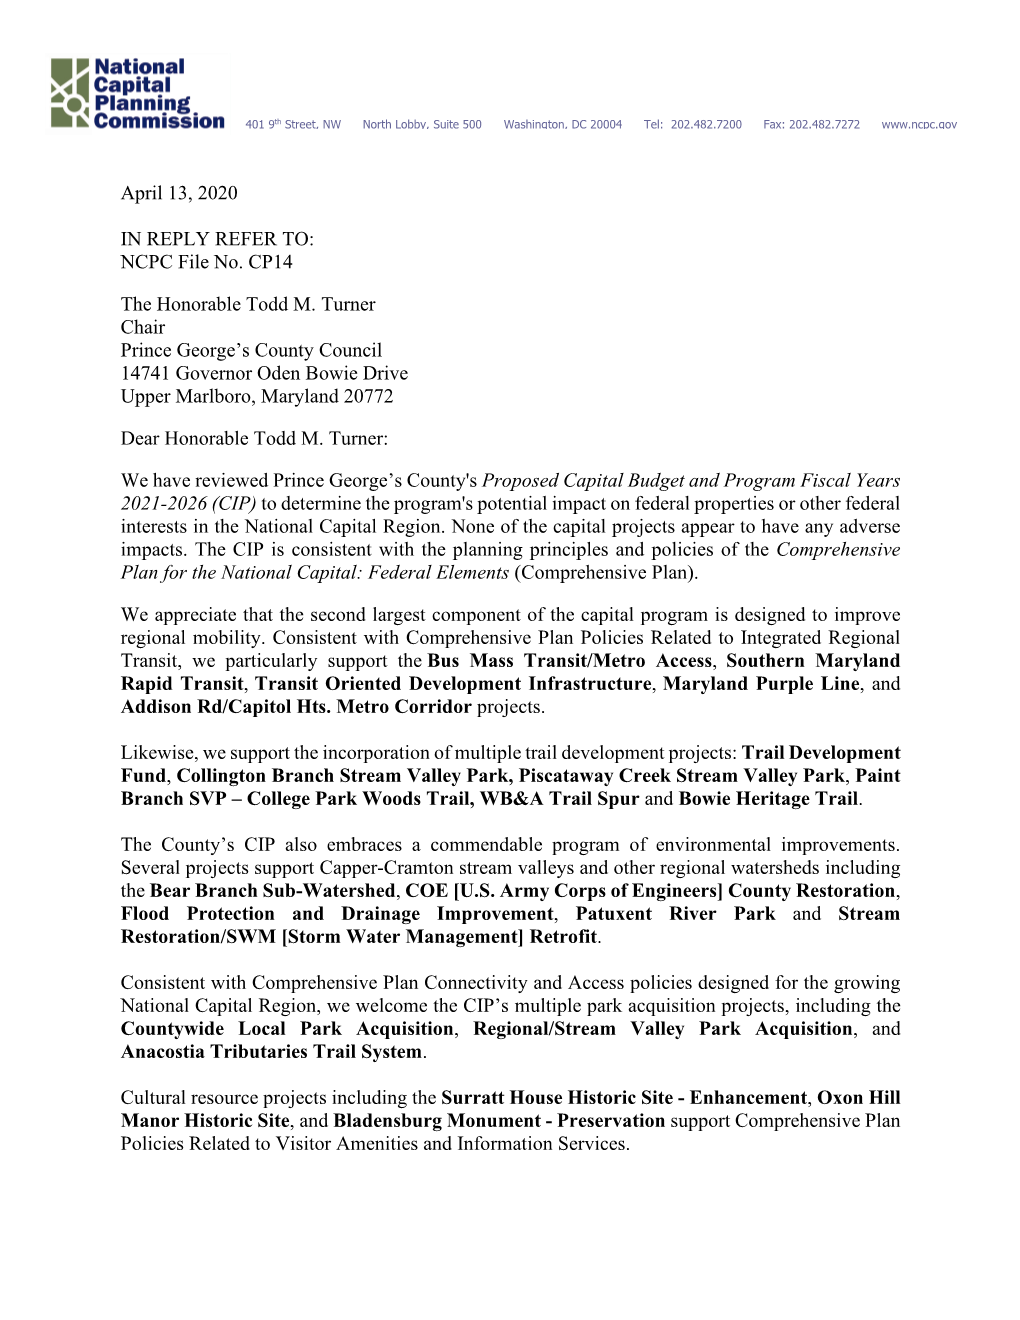 Prince George's County 2021 CIP Letter